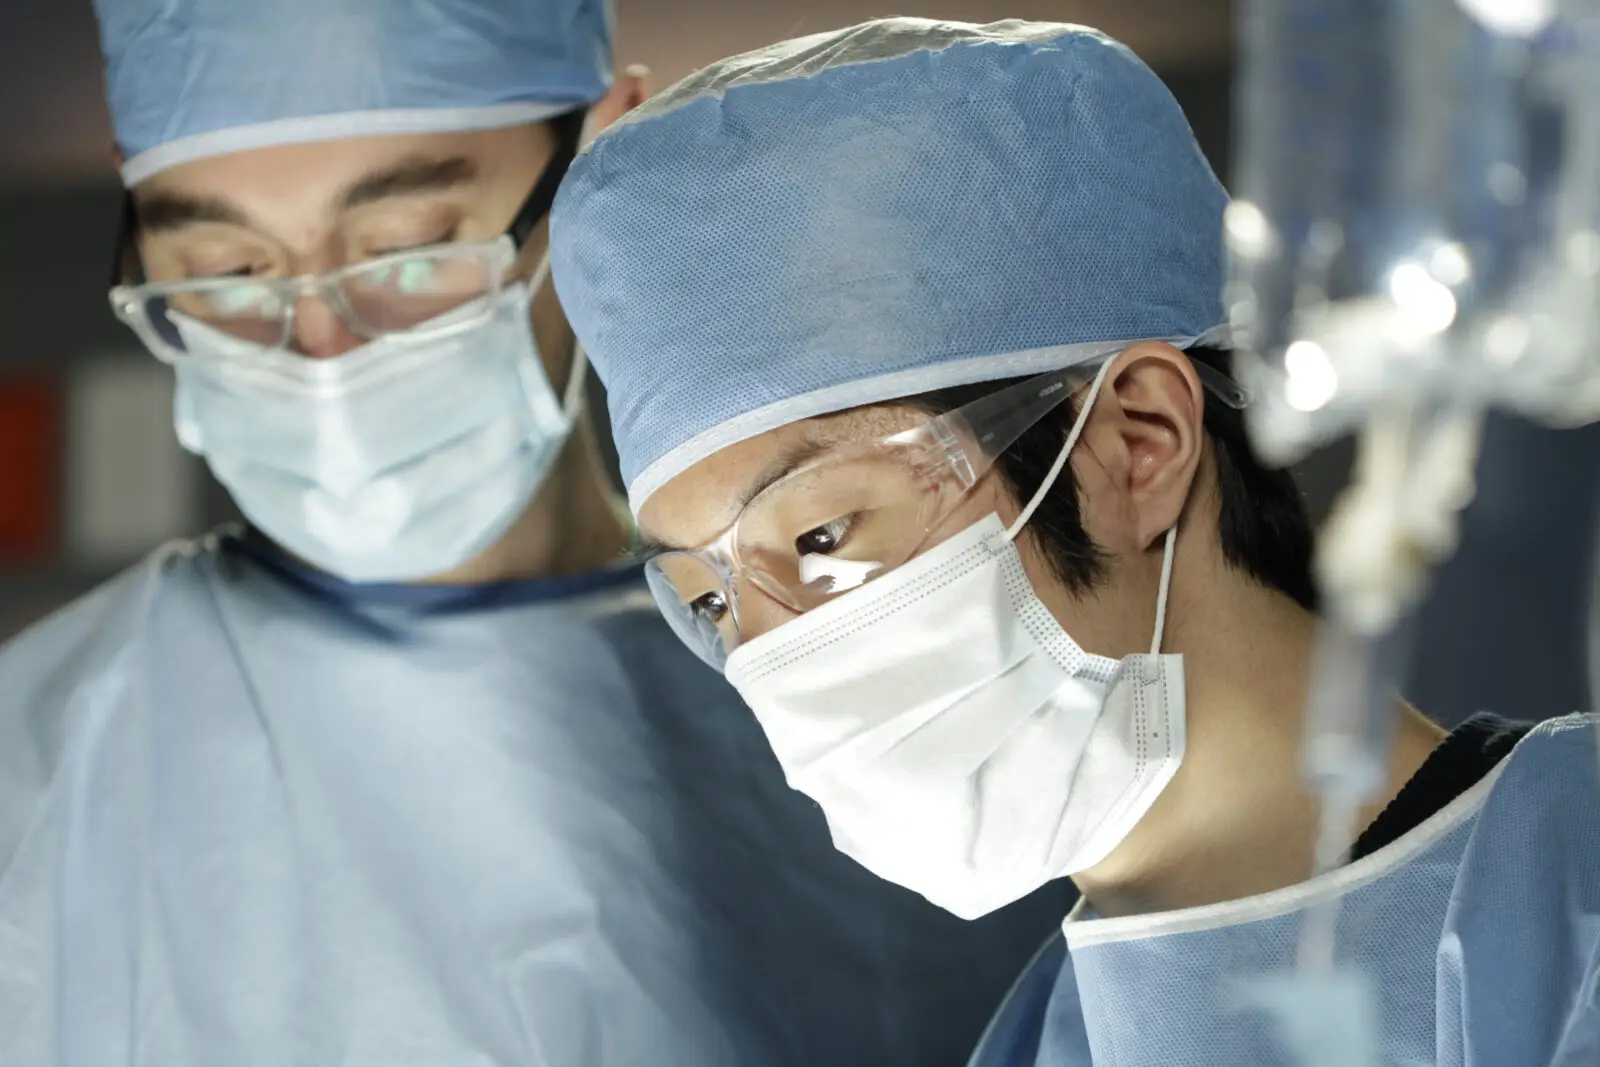 two medical professionals in scrubs, facemak, hats and glasses examining a patient